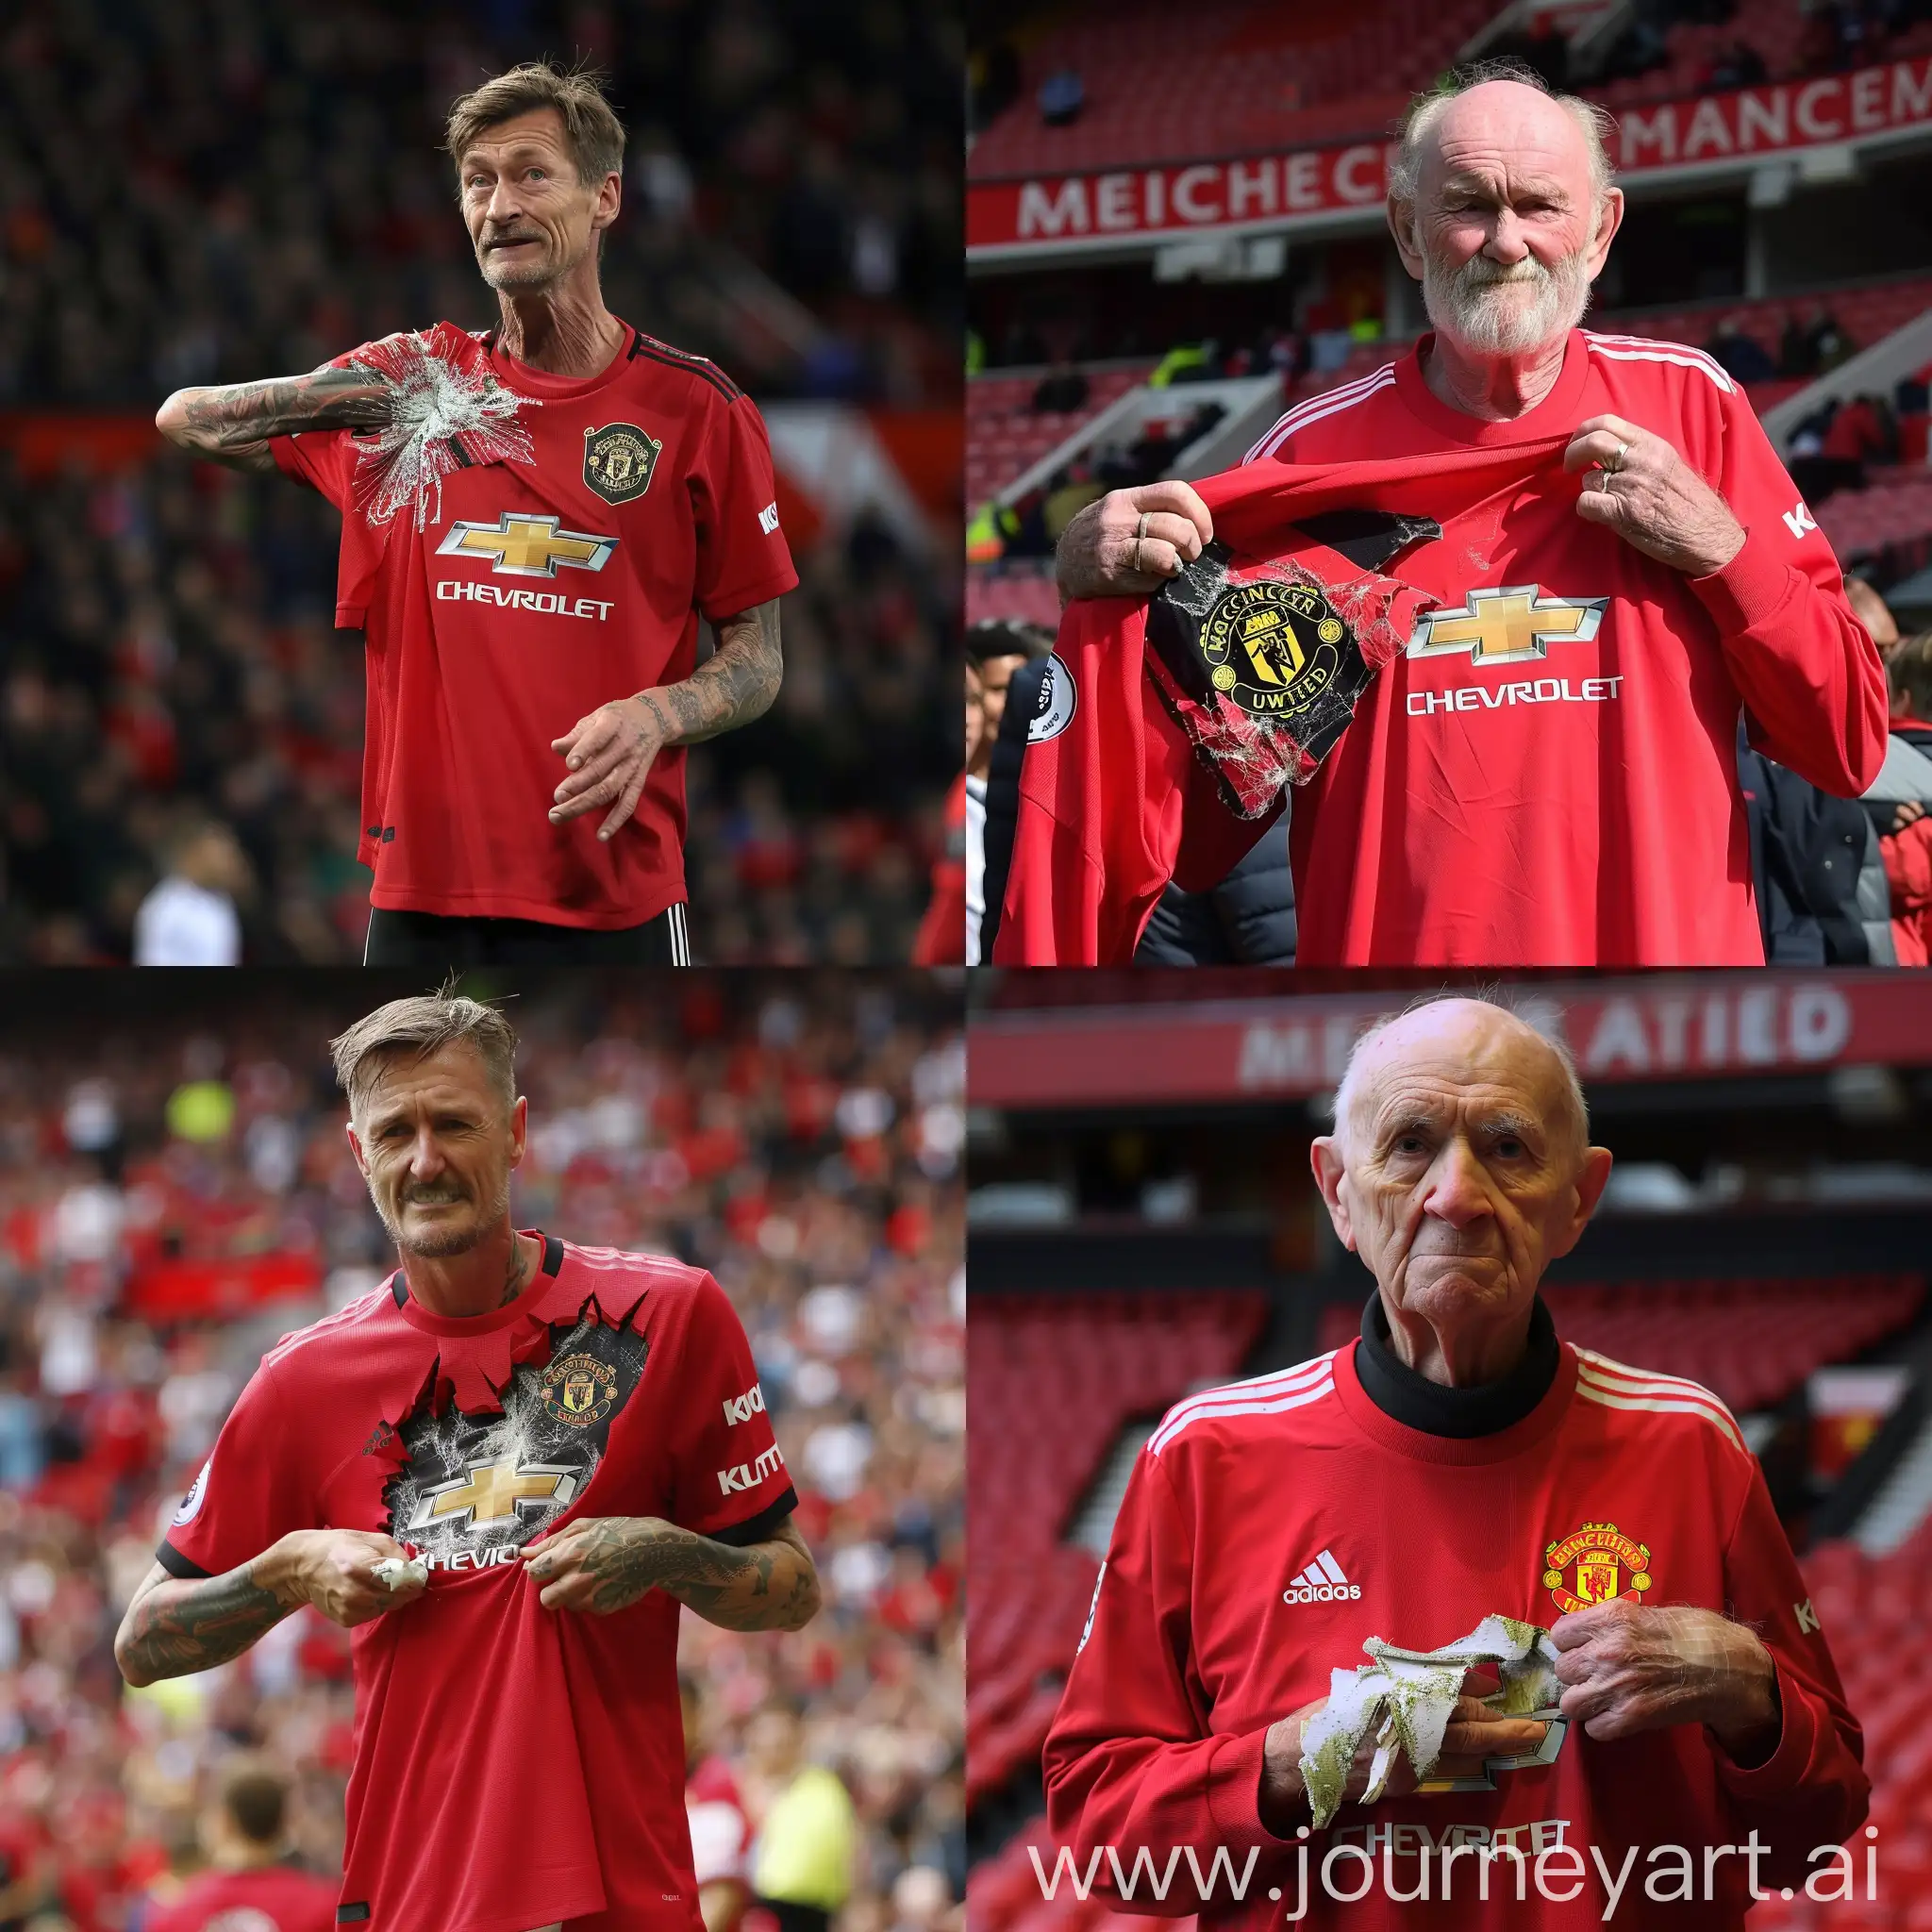 Sir-Jim-Ratcliffe-Pleading-in-Torn-Manchester-United-Shirt